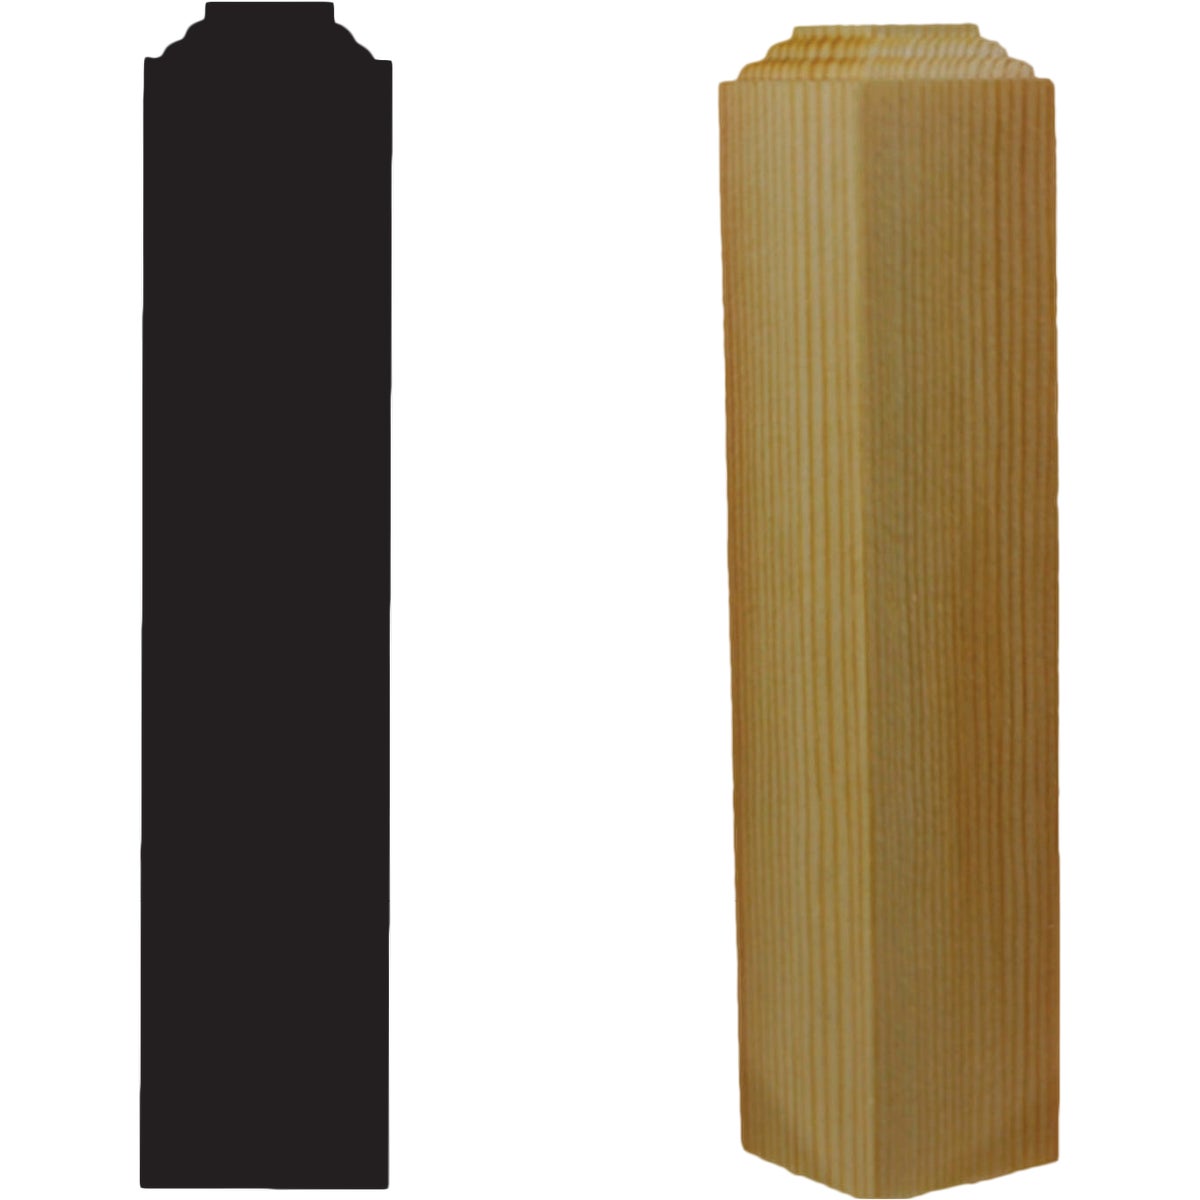 Item 190179, Designed for use with all standard wood moldings presently stocked by all 